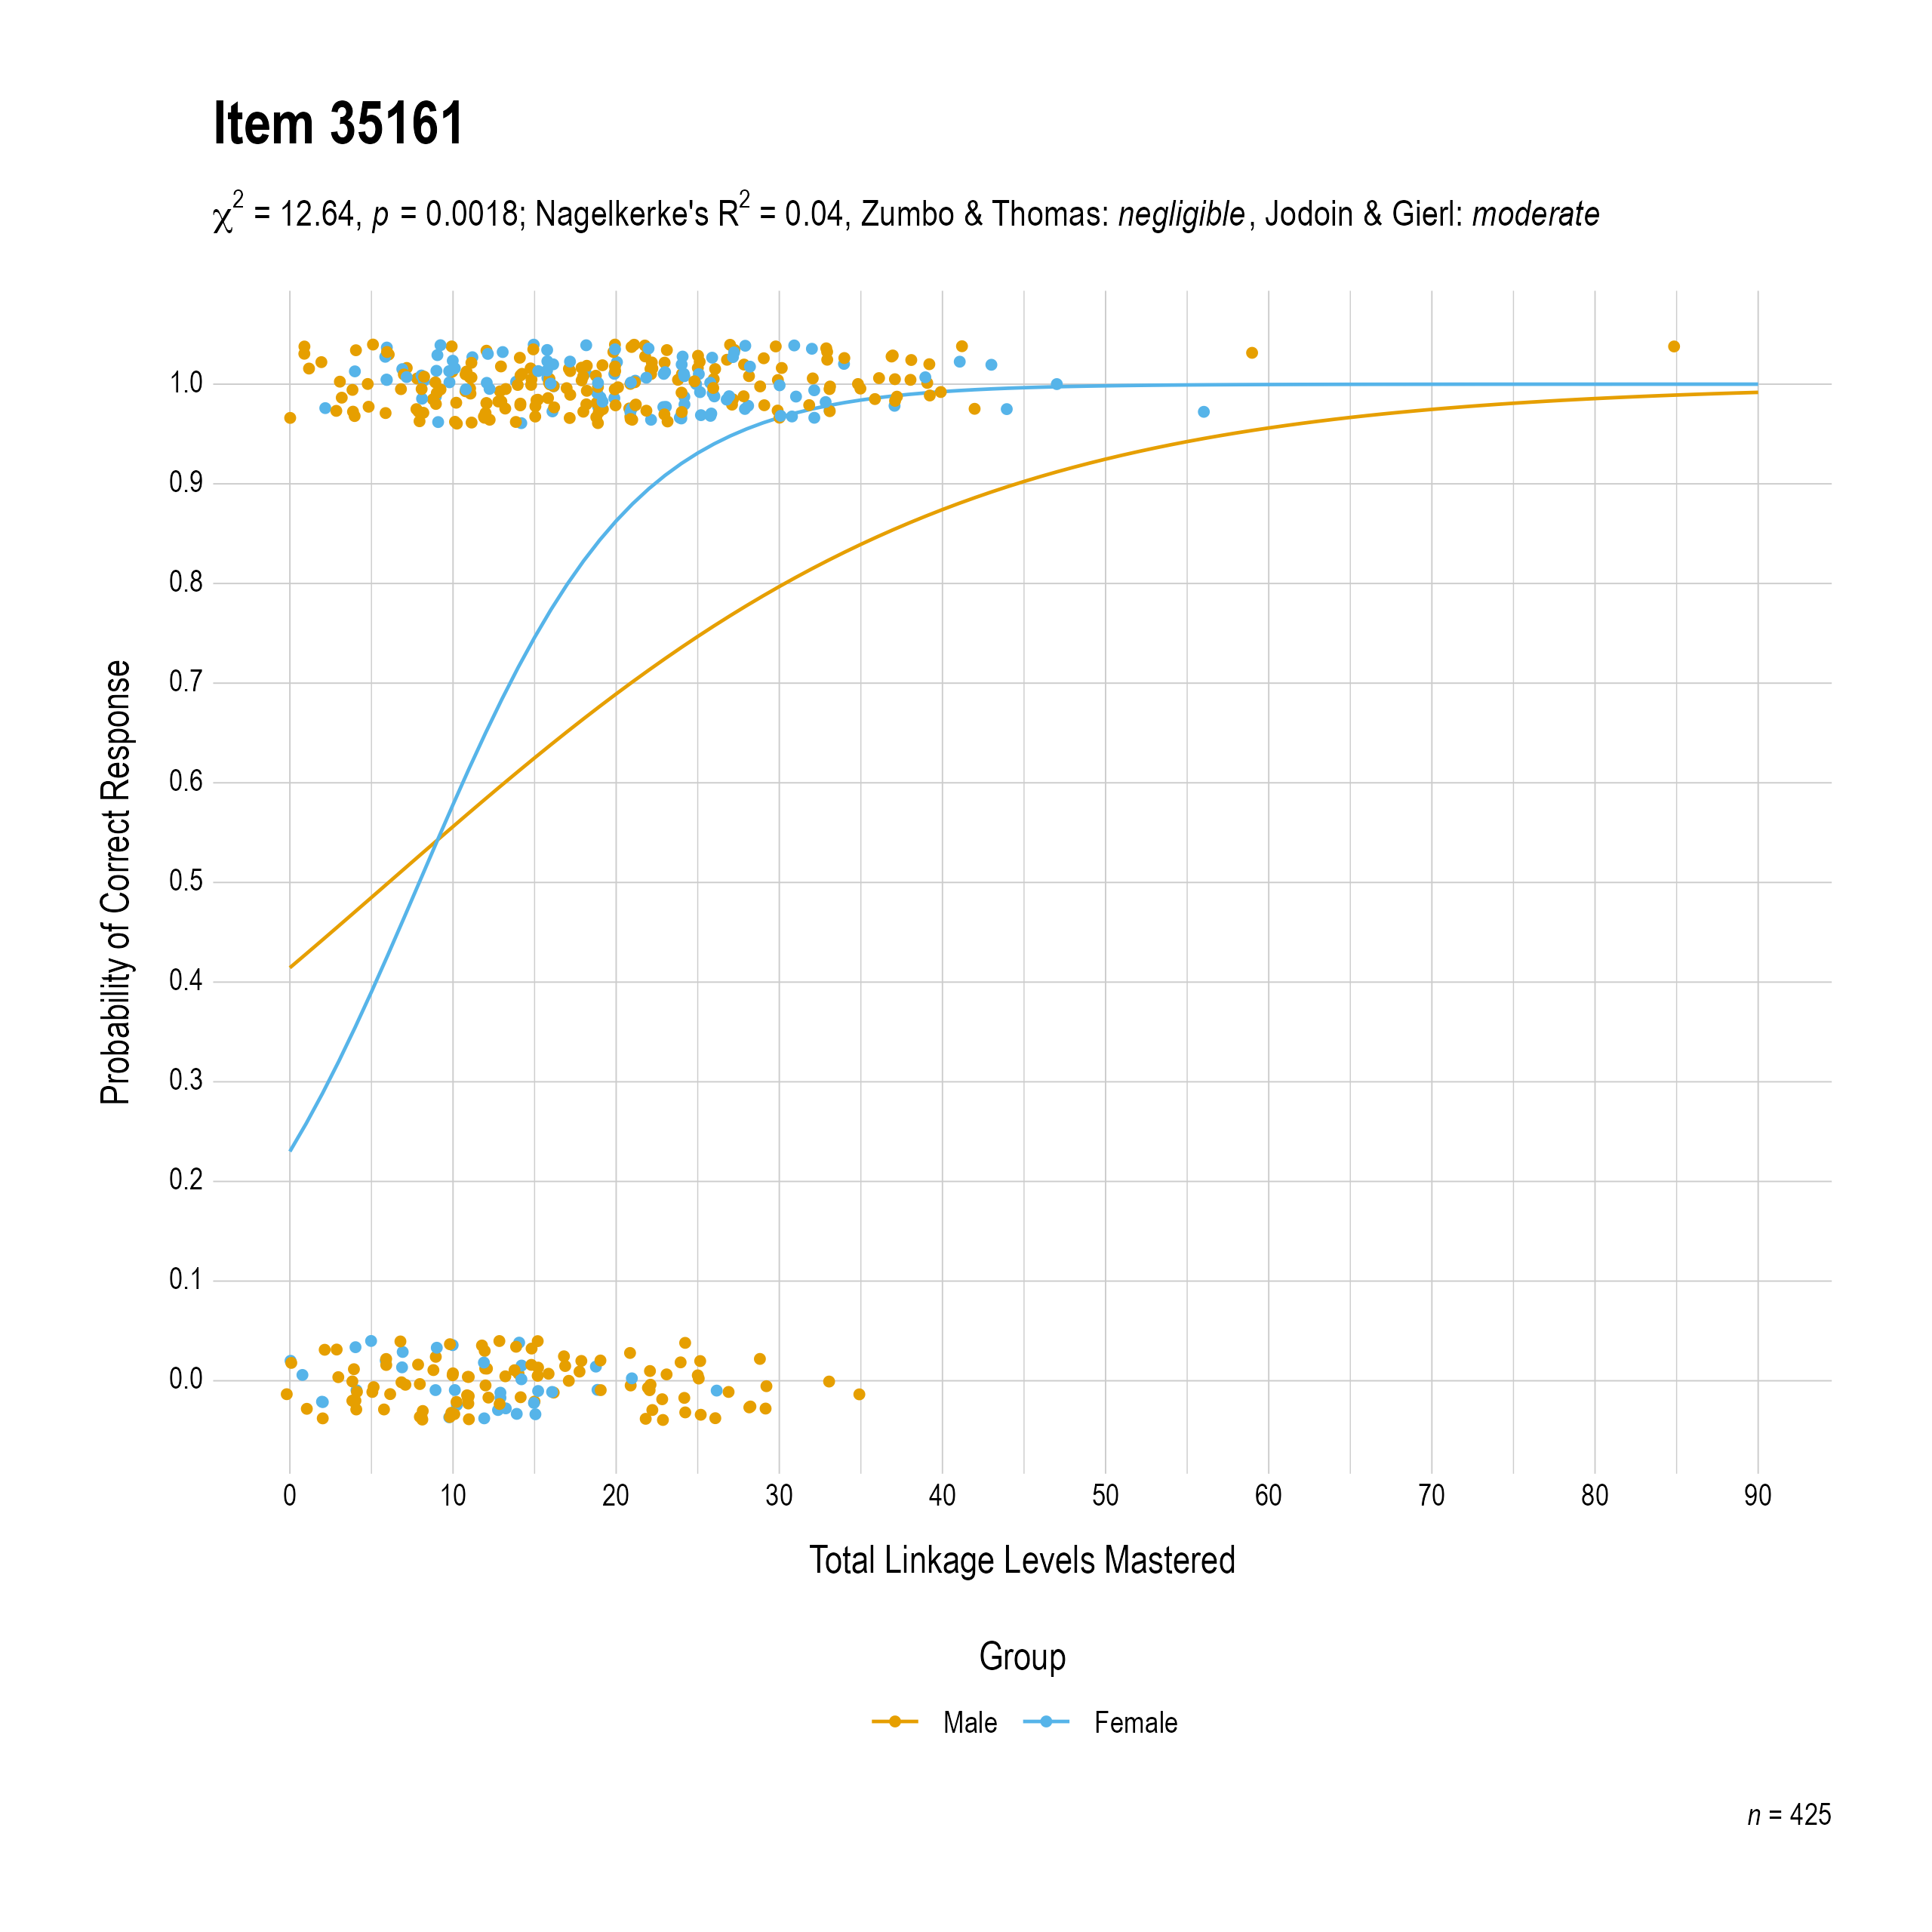 The plot of the combined gender differential item function evidence for English language arts item 35161. The figure contains points shaded by group. The figure also contains a logistic regression curve for each group. The total linkage levels mastered in is on the x-axis, and the probability of a correct response is on the y-axis.